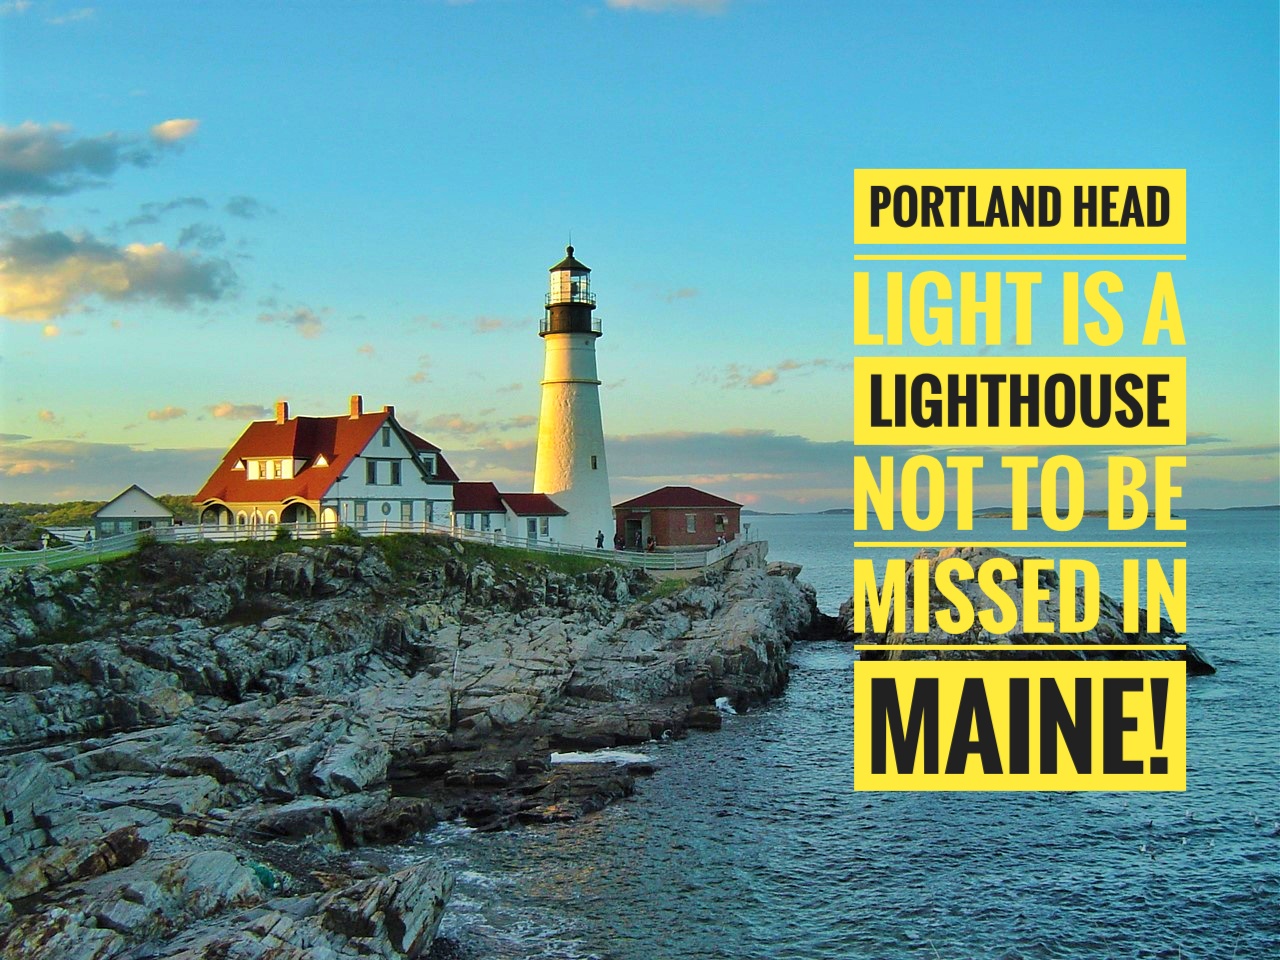 Portland Head Light is a Lighthouse Not to be Missed in Maine!